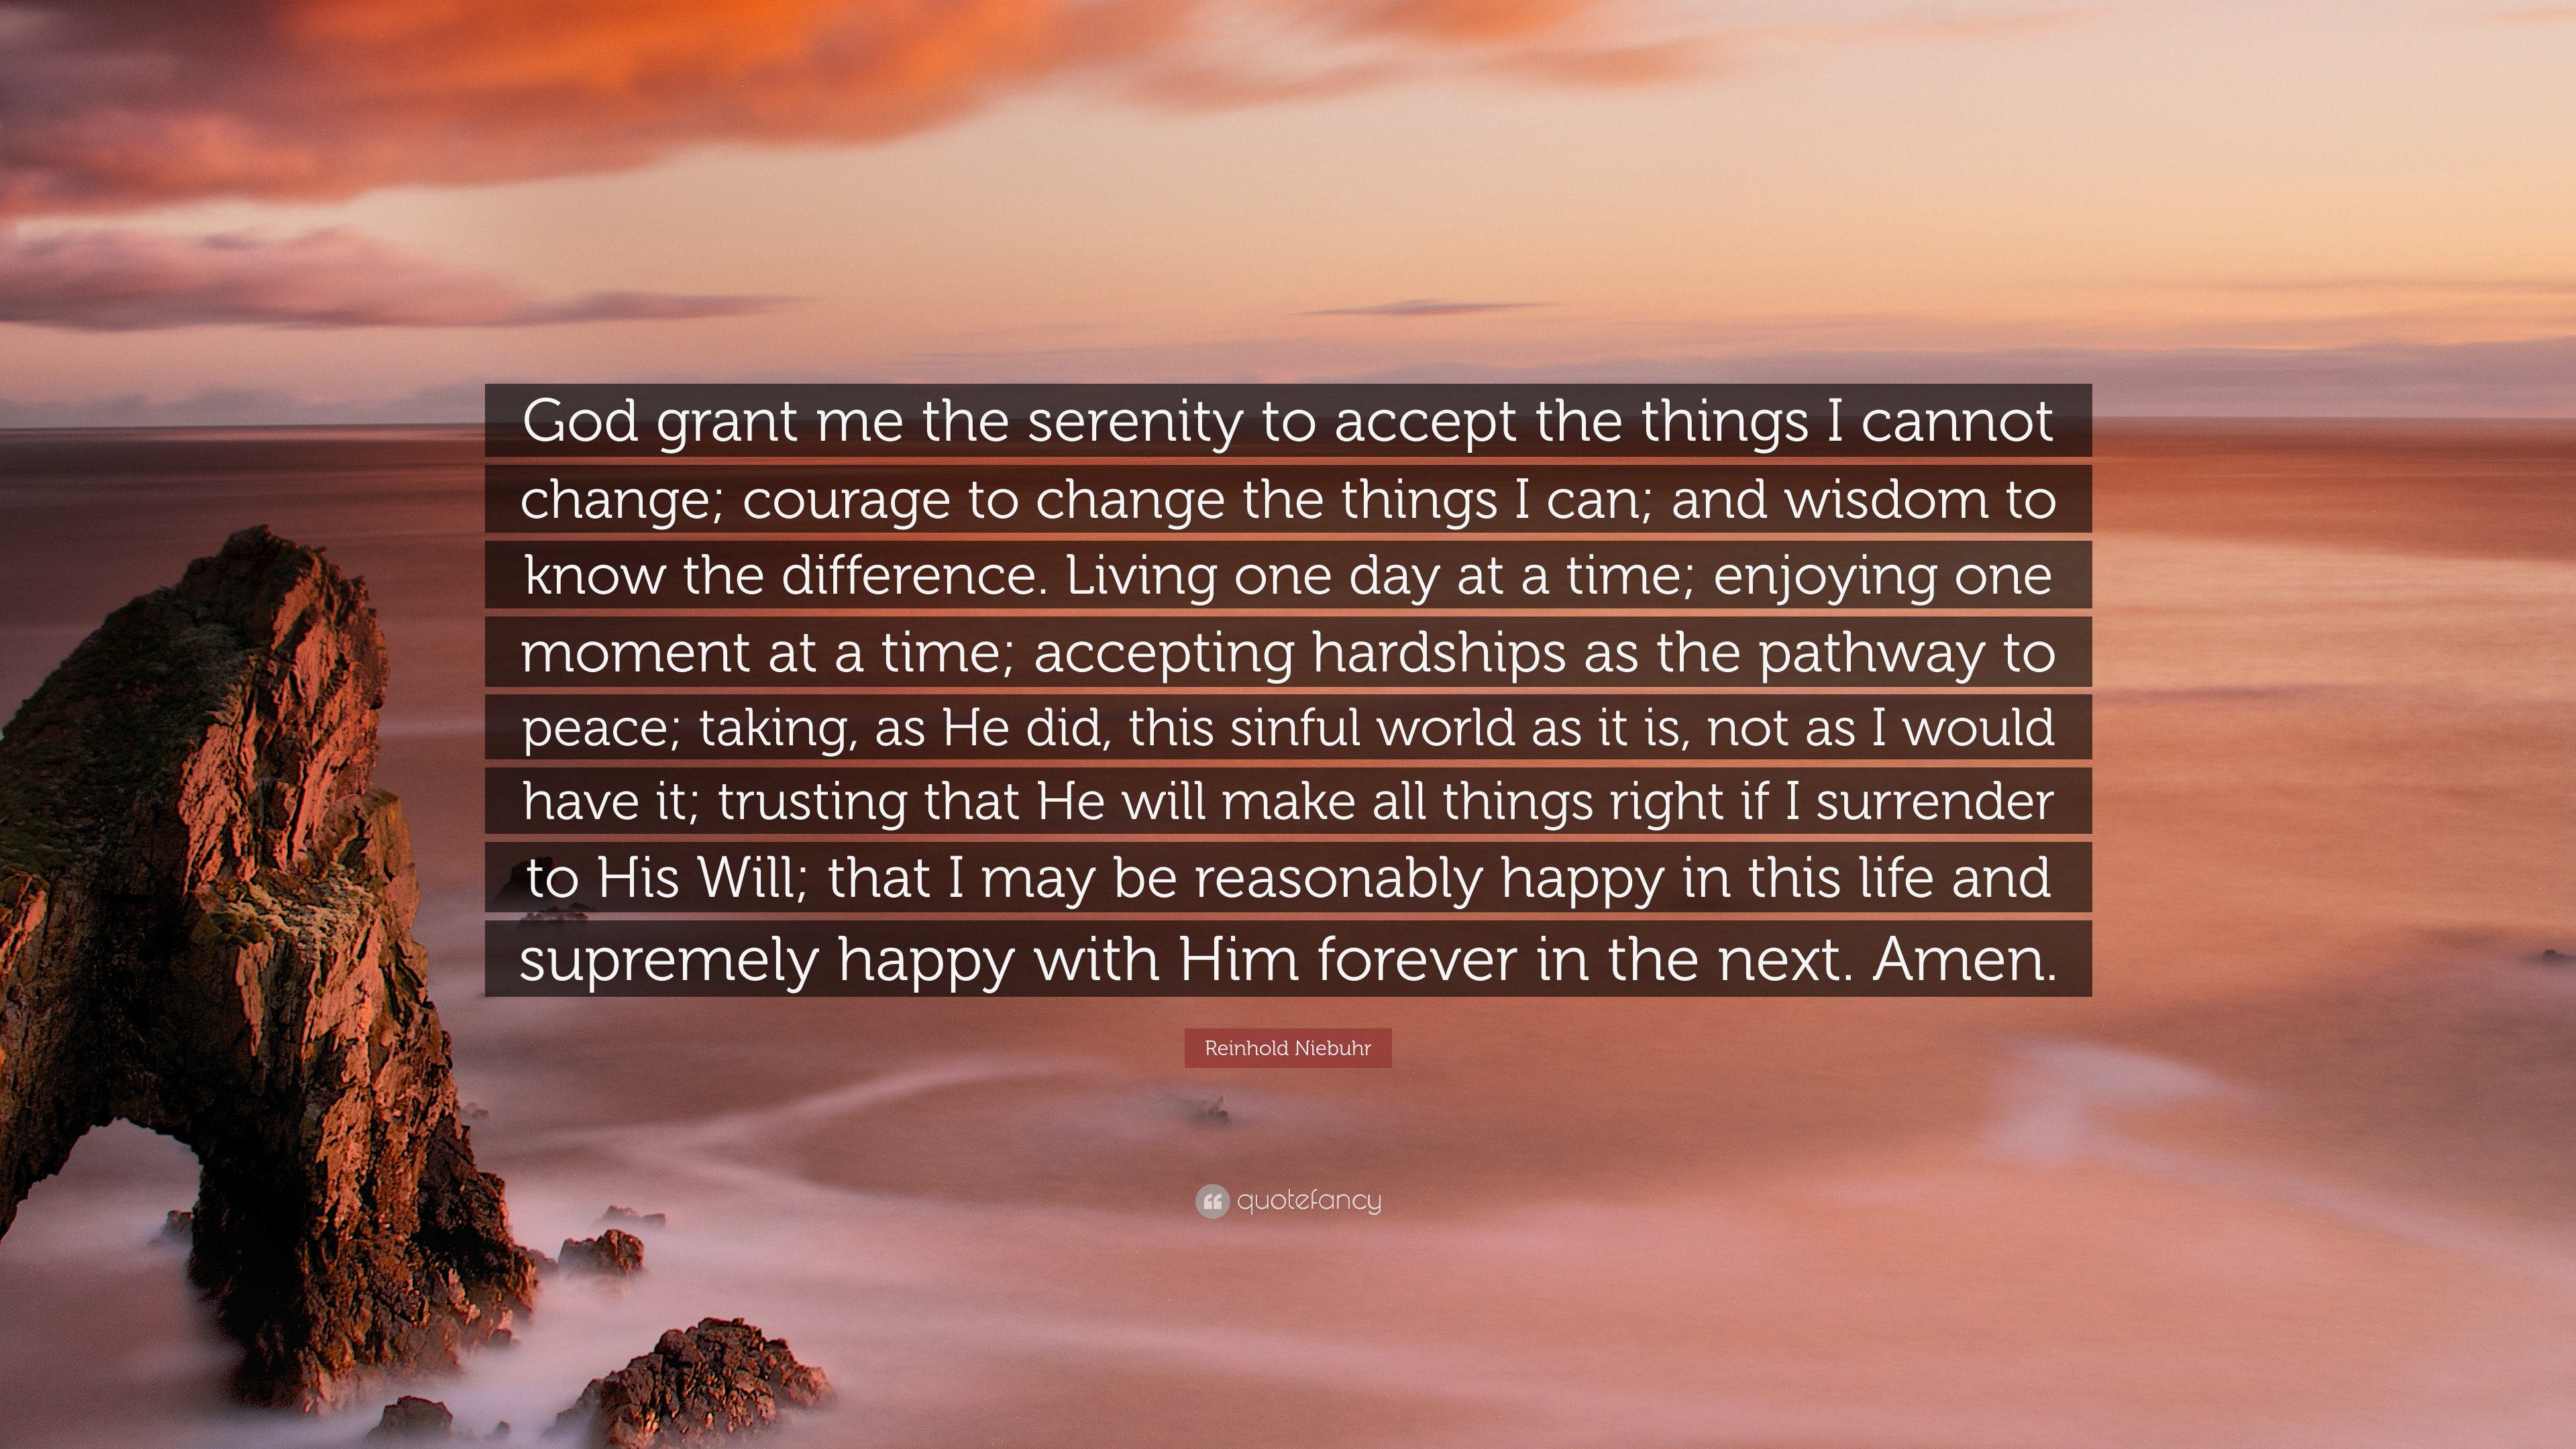 serenity-prayer-quote-god-grant-me-the-serenity-to-accept-the-things